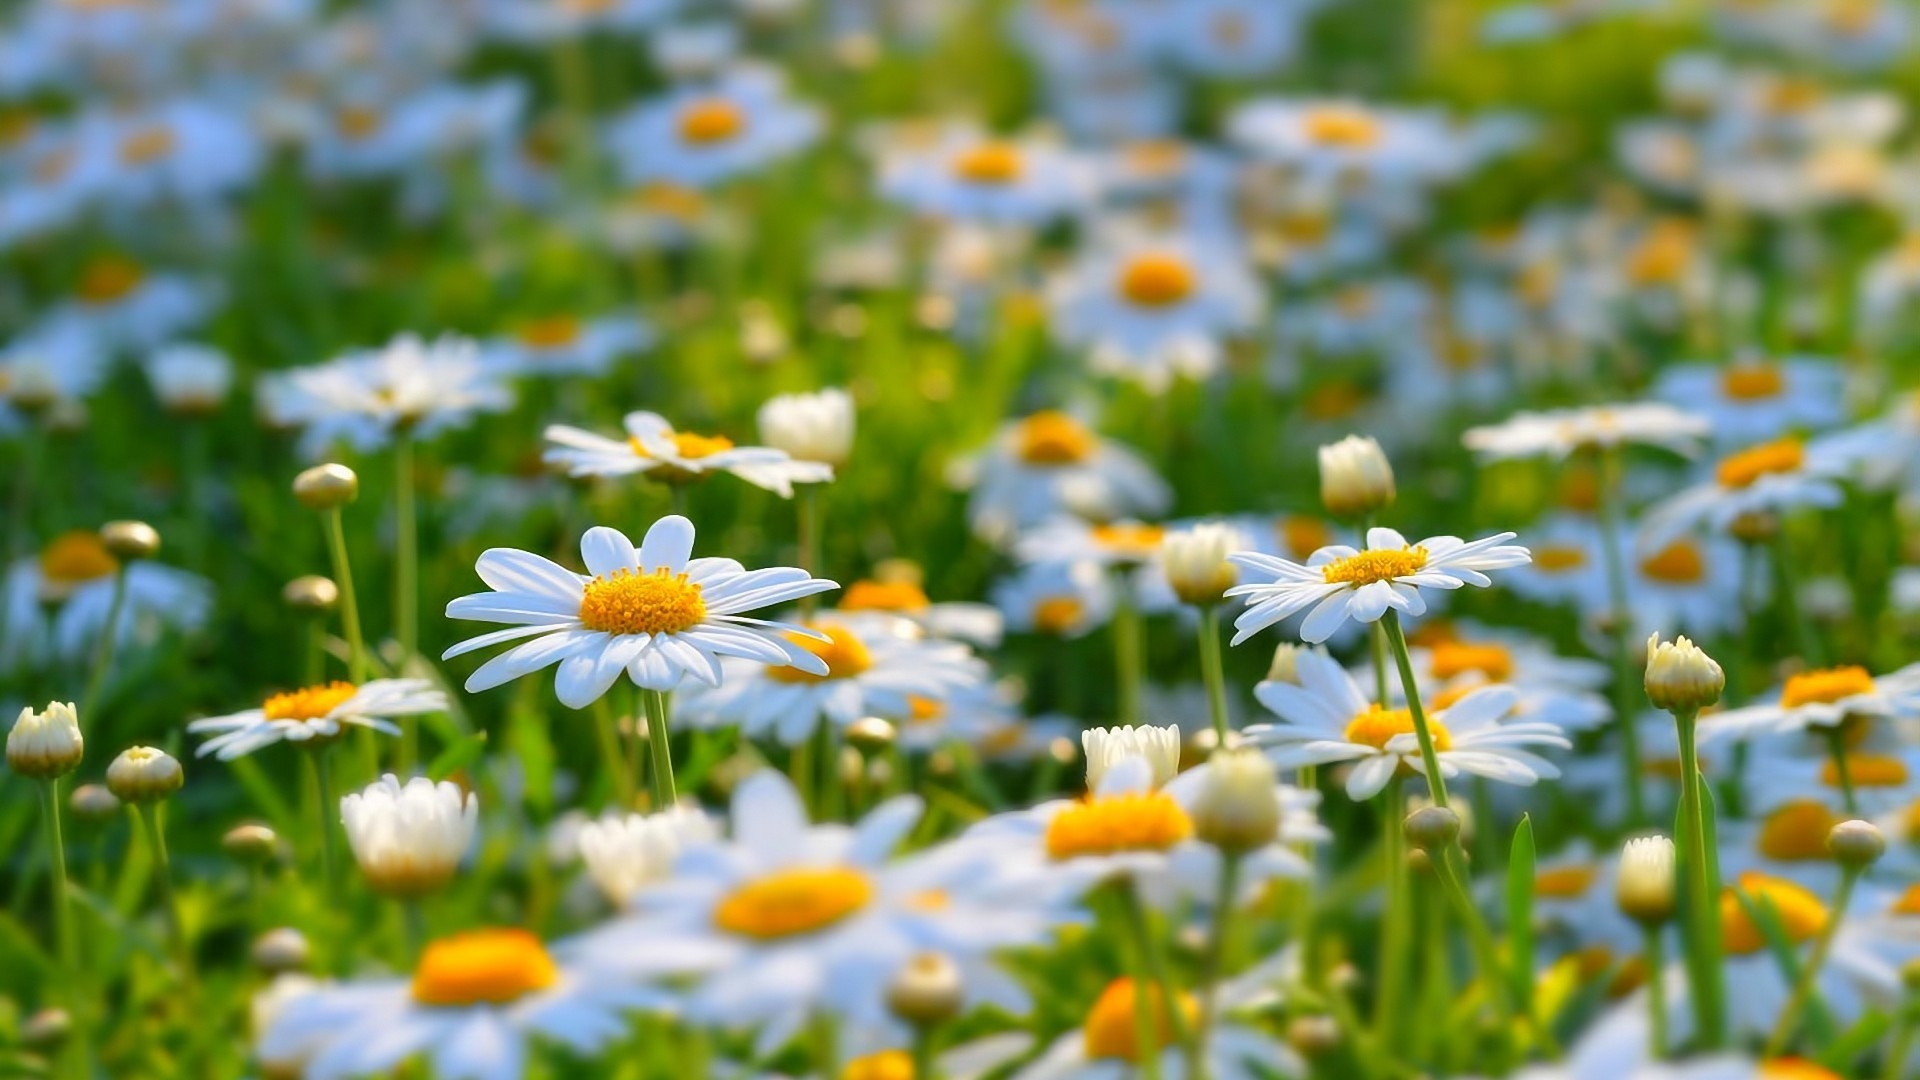 Beautiful Daisies for 1920 x 1080 HDTV 1080p resolution